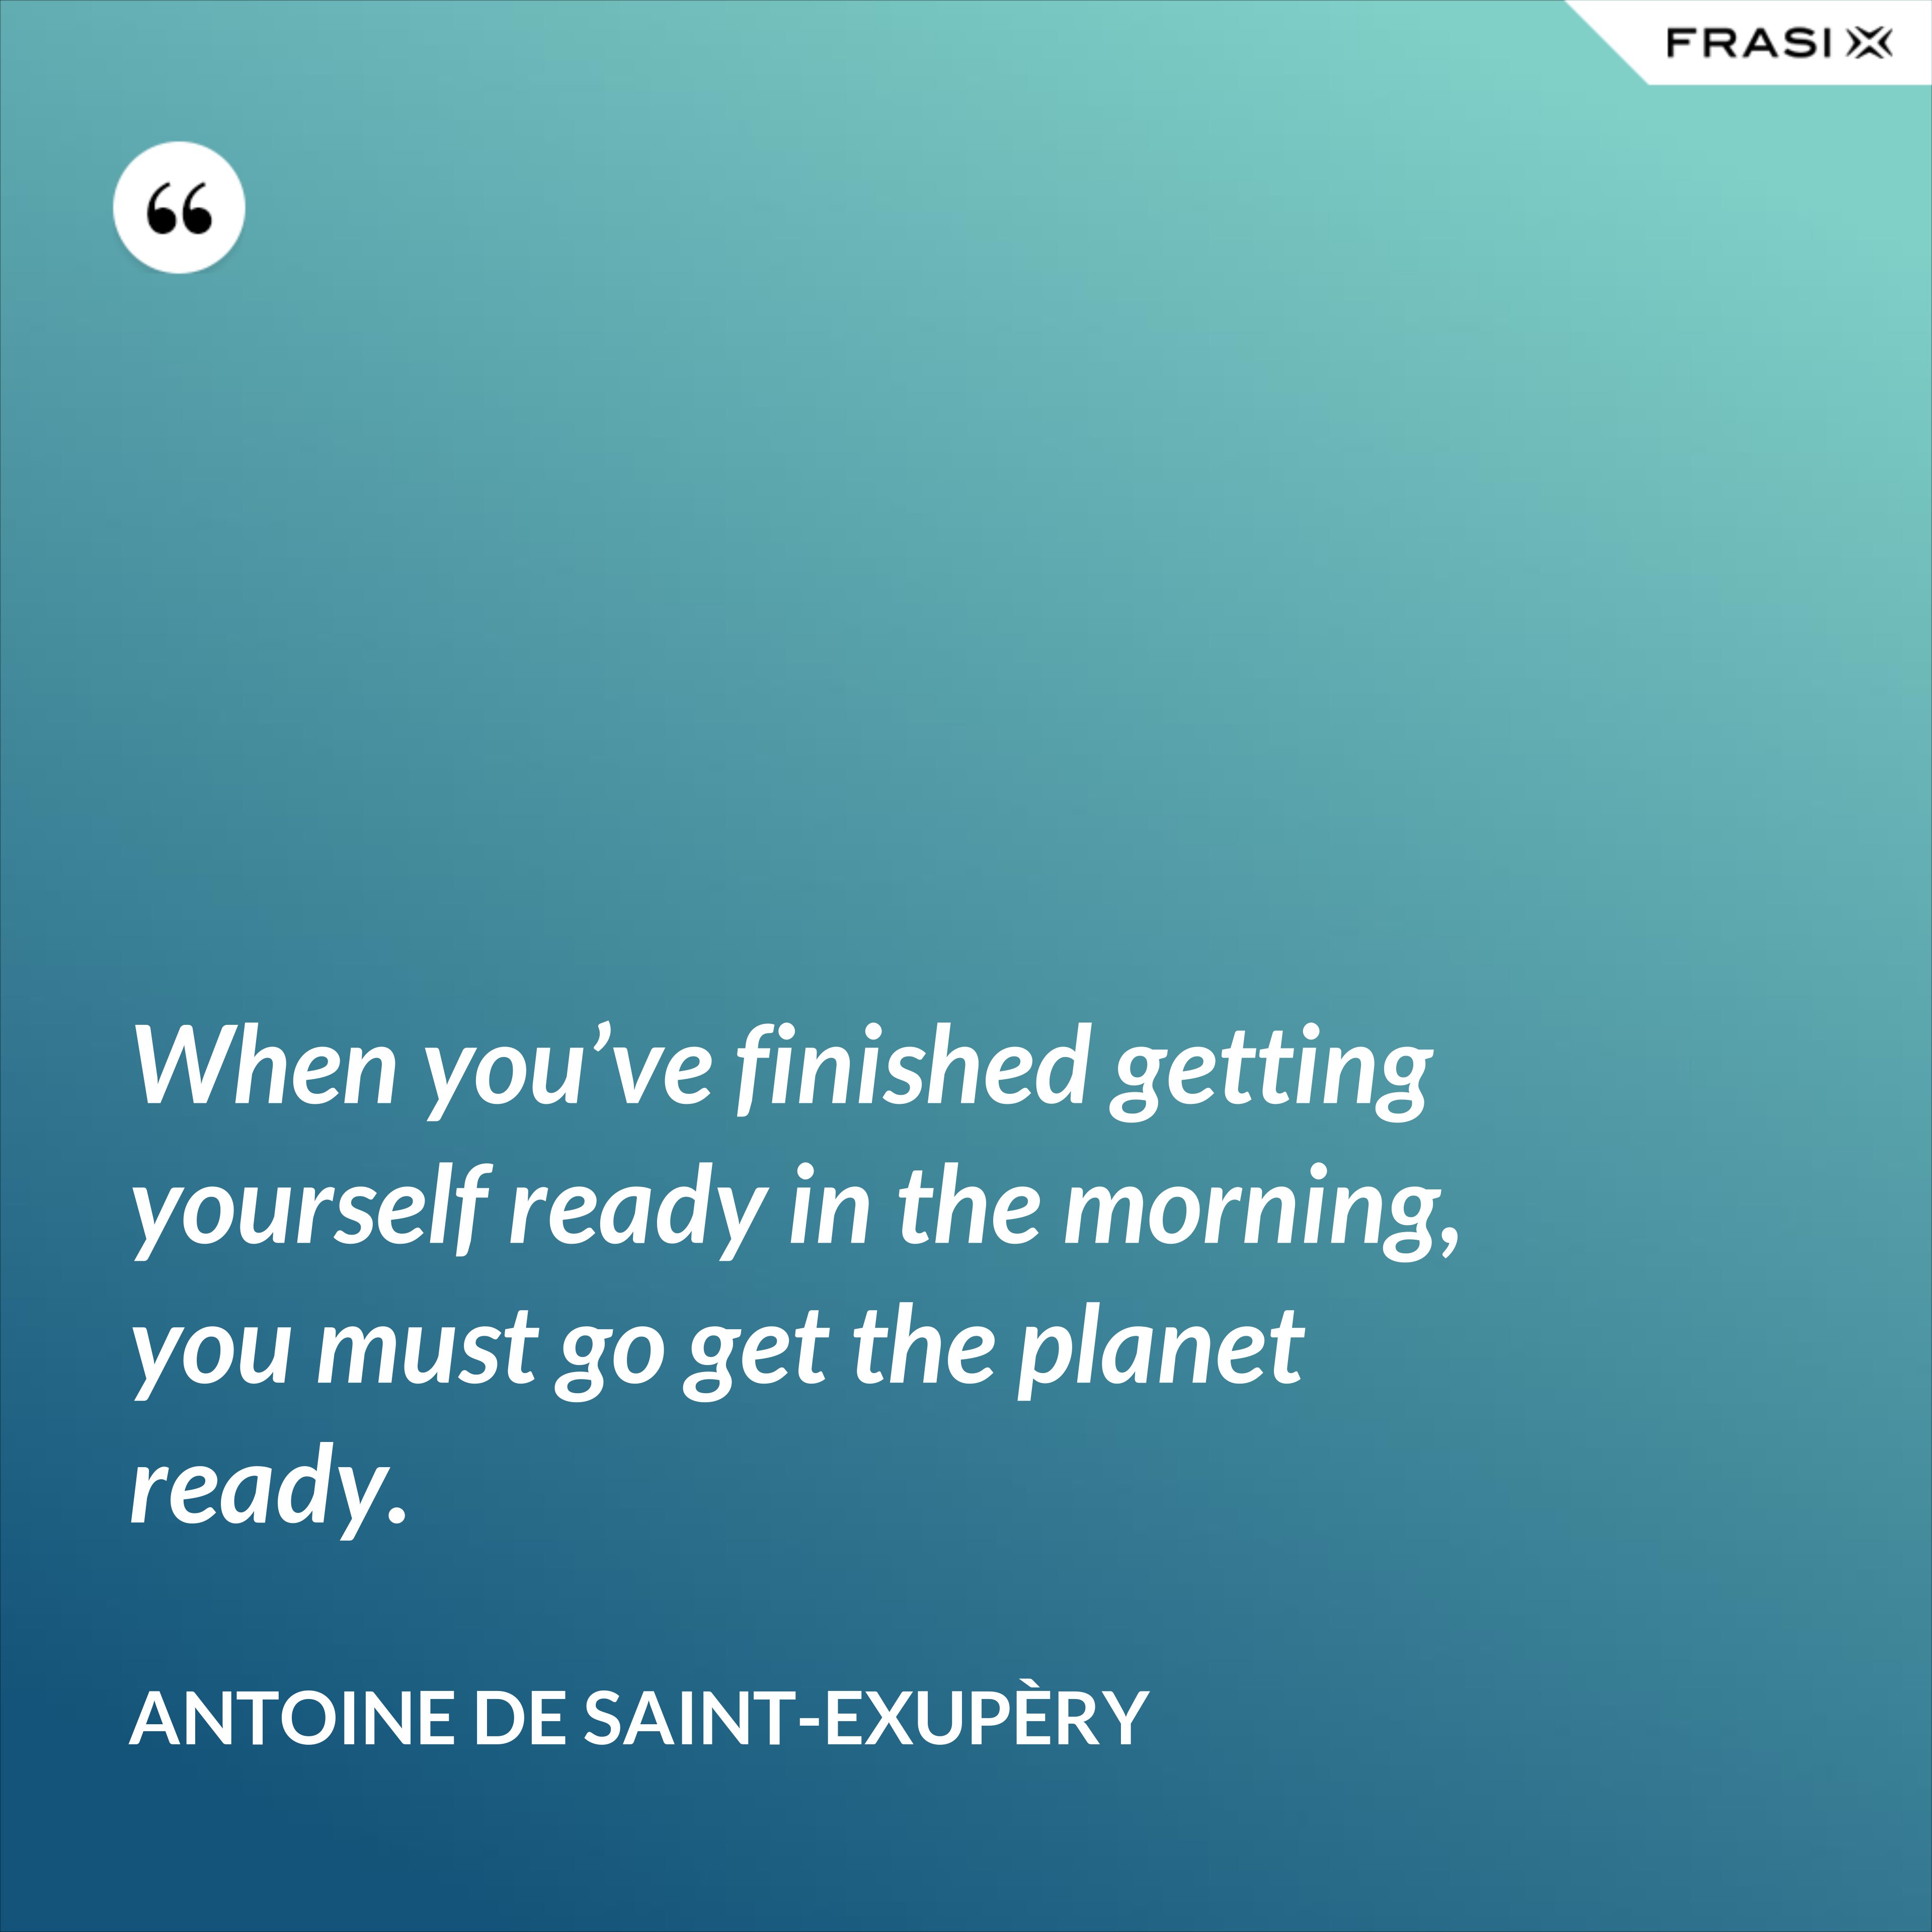 When you’ve finished getting yourself ready in the morning, you must go get the planet ready. - Antoine de Saint-Exupèry